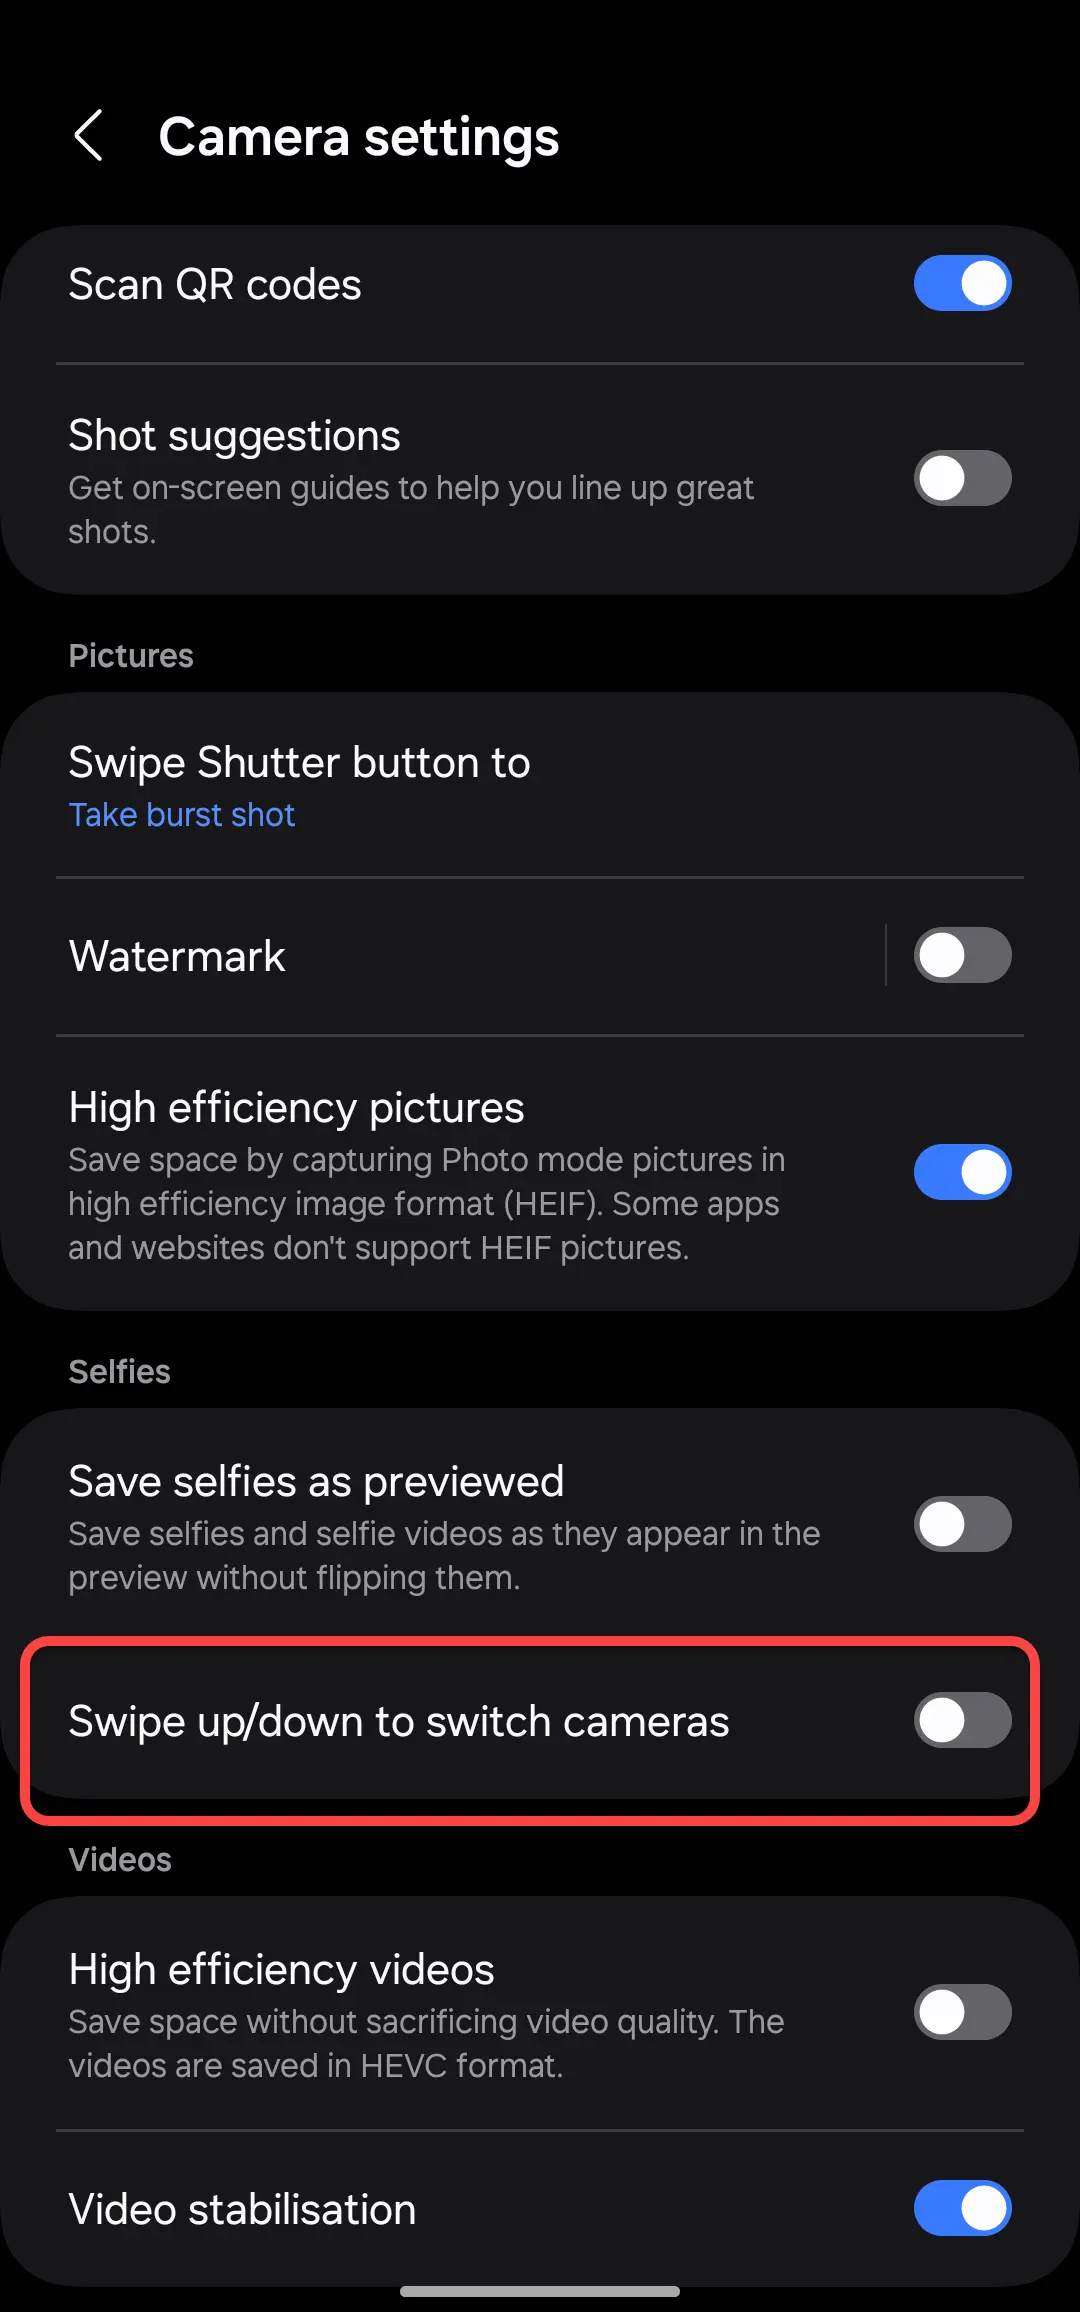 Swipe Up/Down to Switch Cameras on Samsung: How to Disable?